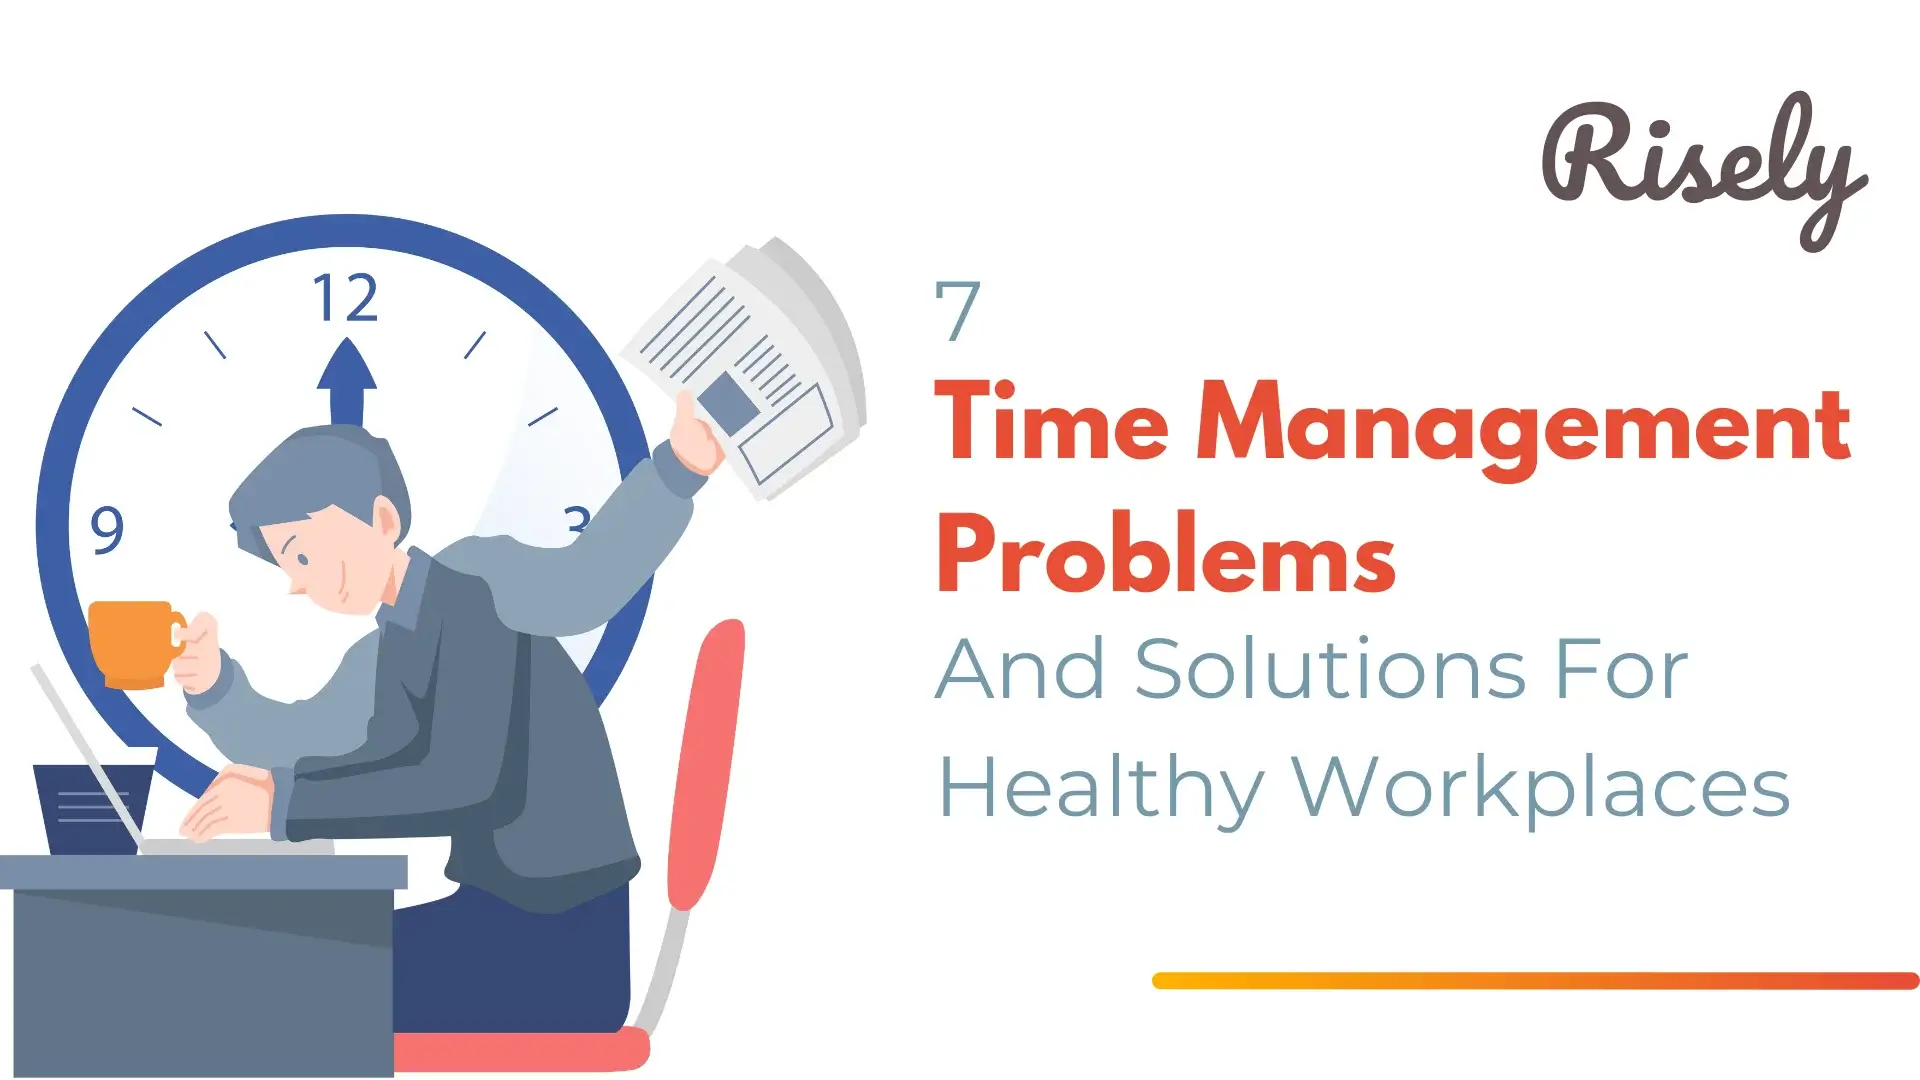 7 Time Management Problems And Solutions For Healthy Workplaces